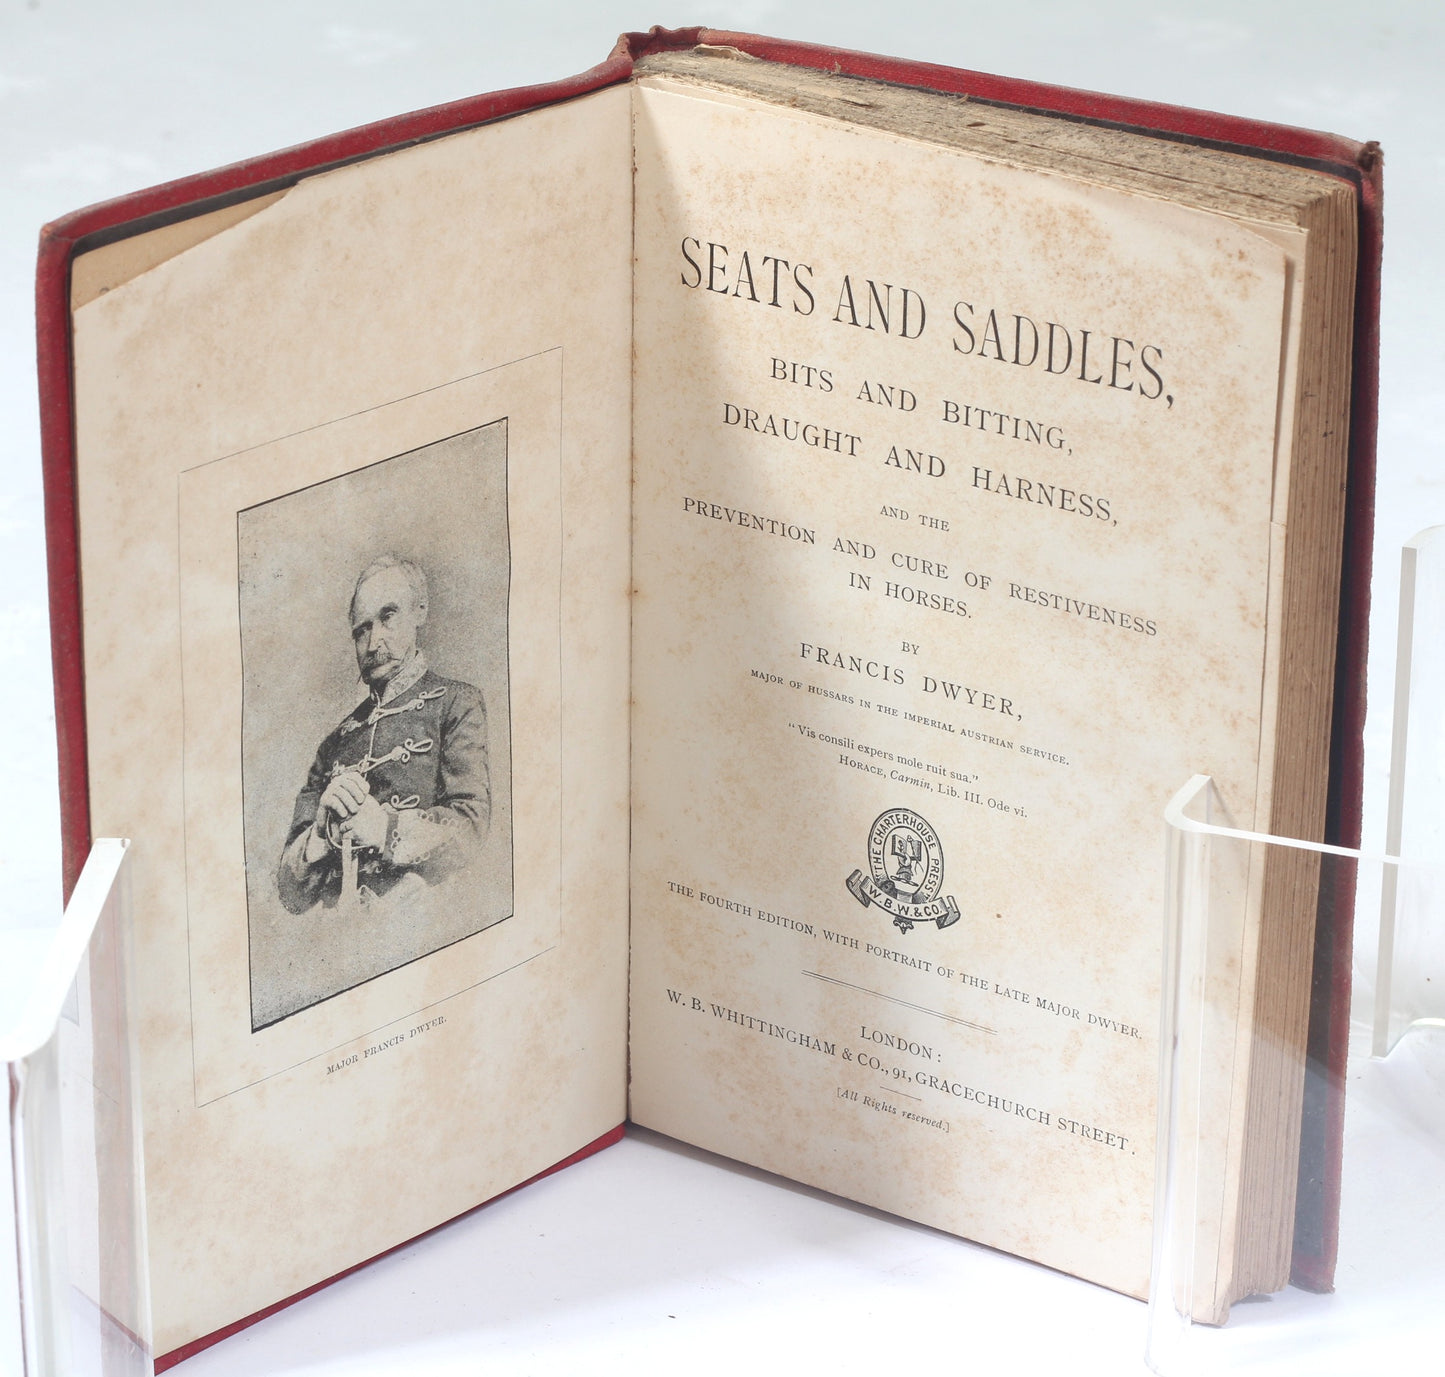 On seats and saddles : bits and bitting and the prevention and cure of restiveness in horses by Francis Dwyer, 4th Ed.